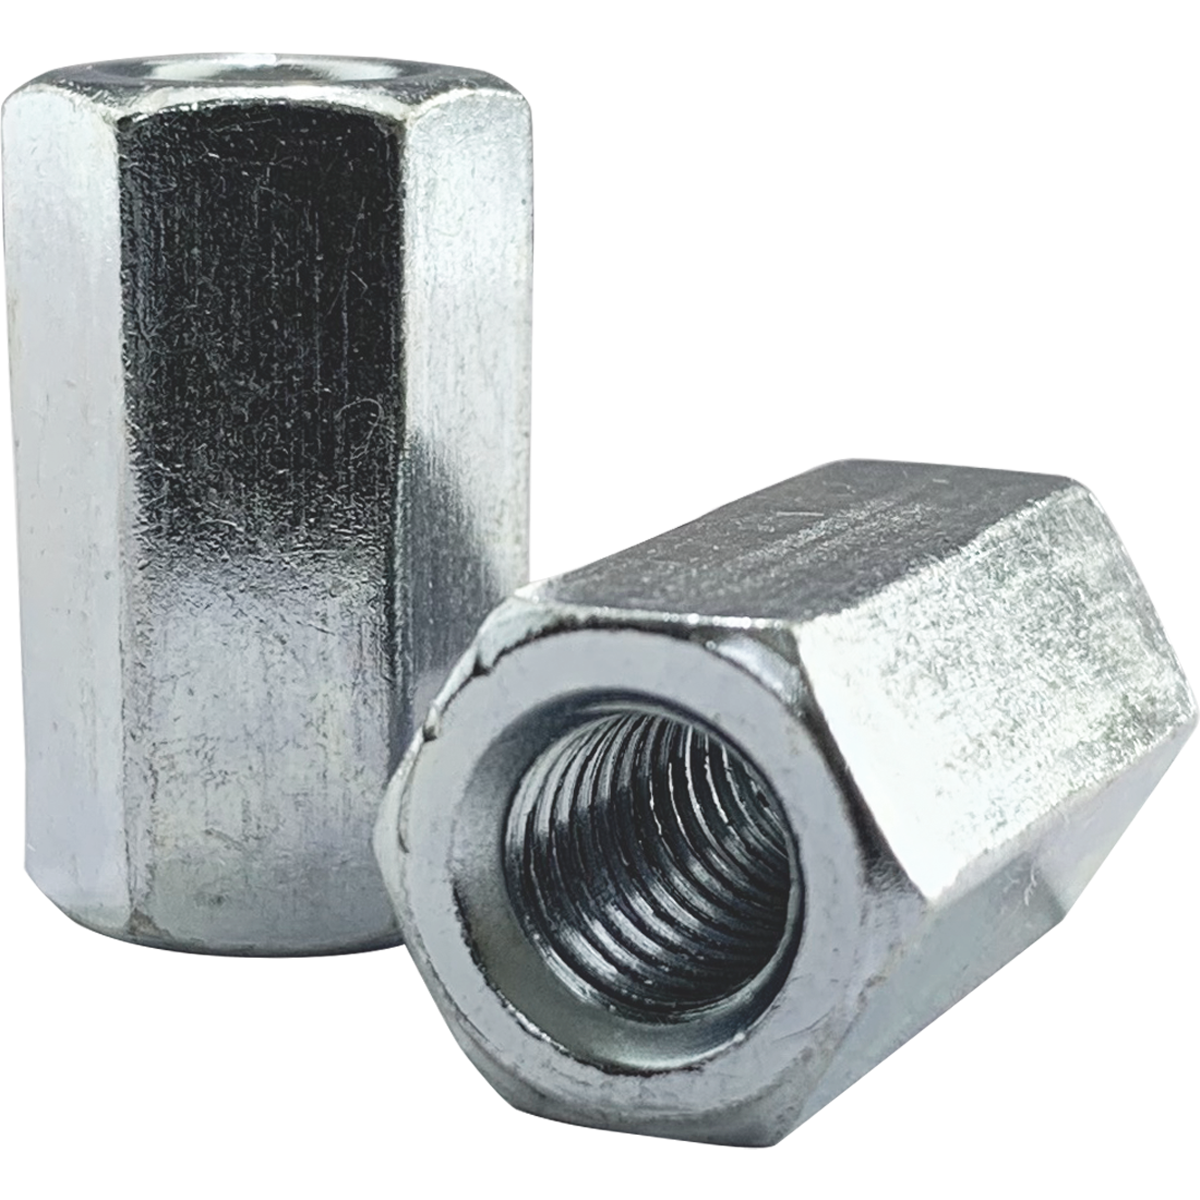 BZP-Bright Zinc Plated, hexagonal stud connector nuts. Also known as extension nuts are available at great prices and in a range of diameters. Ideal for joining bolts and threaded bar